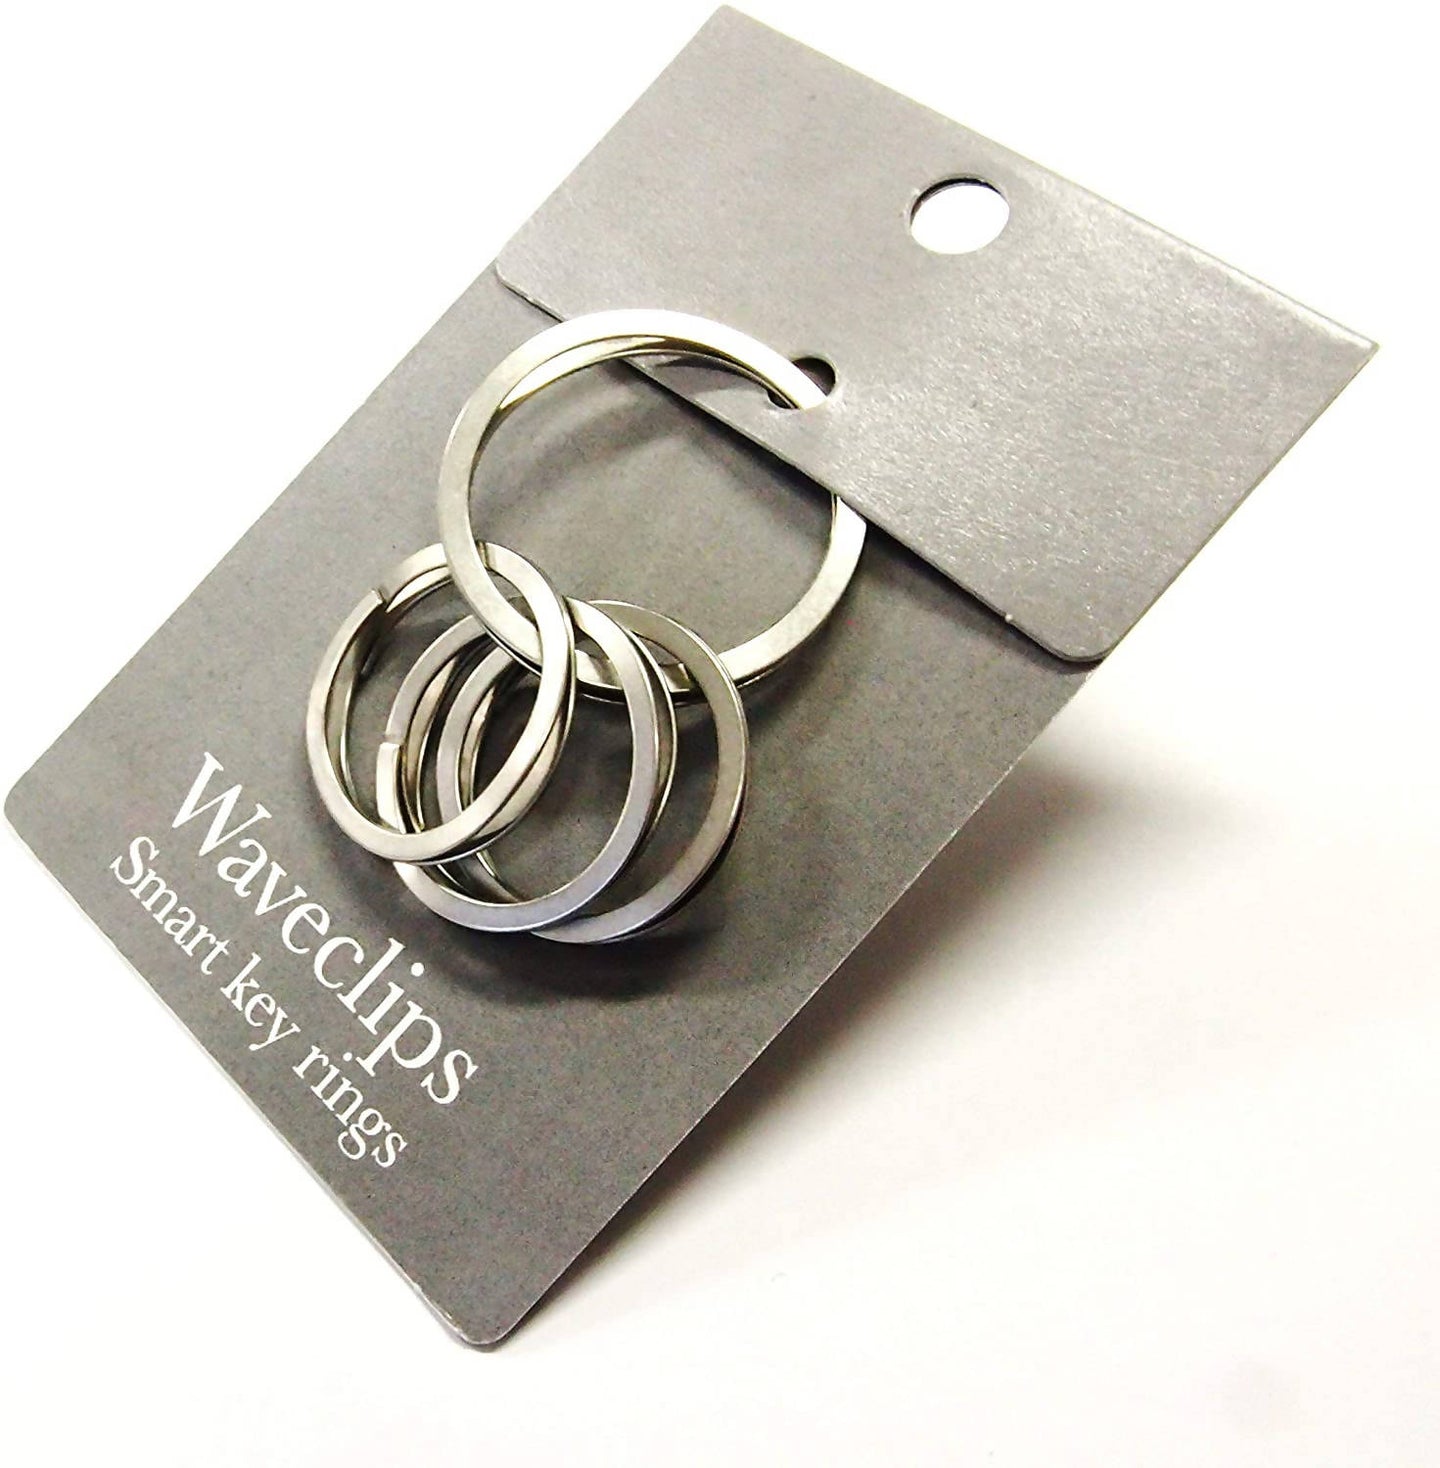 Waveclips Smart Key Rings – 1 Large & 3 Medium – Silver Color – New Japanese Invention Featured on NHK TV!